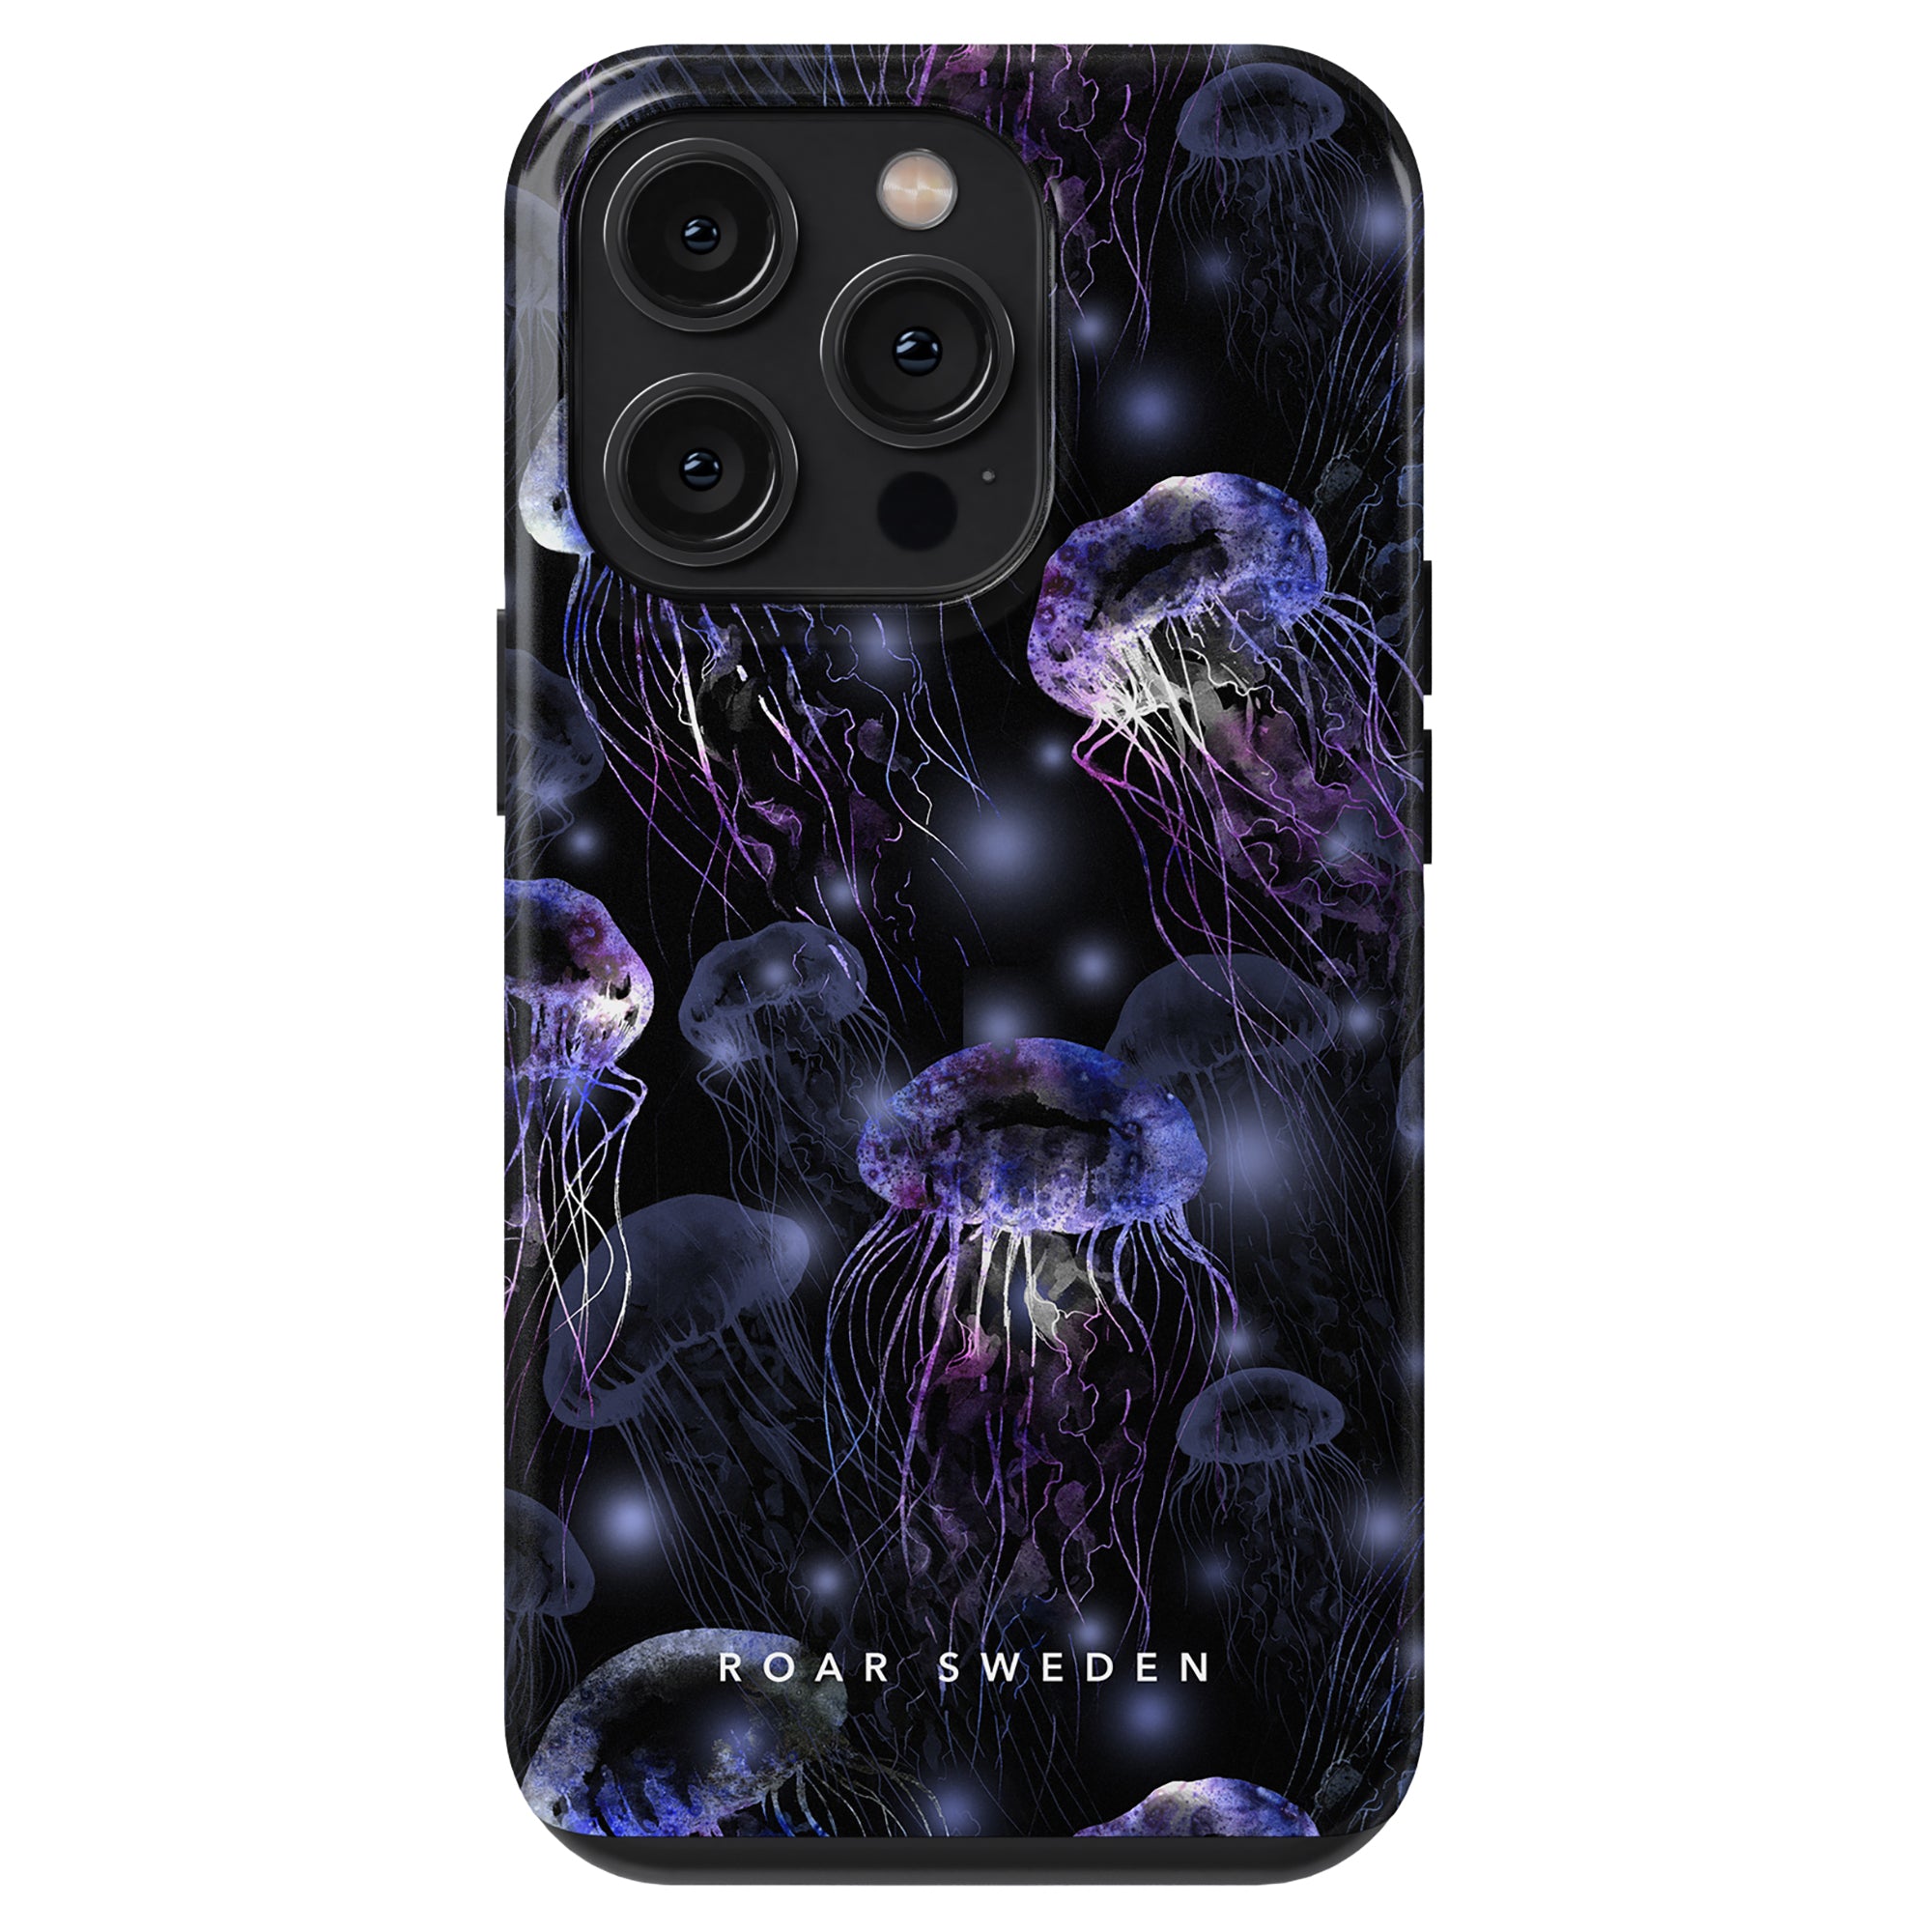 Smack - Tough Case featuring a dark, oceanic design with bioluminescent purple jellyfish and delicate tendrils amidst dark waters, including a label "roar sweden" at the bottom.